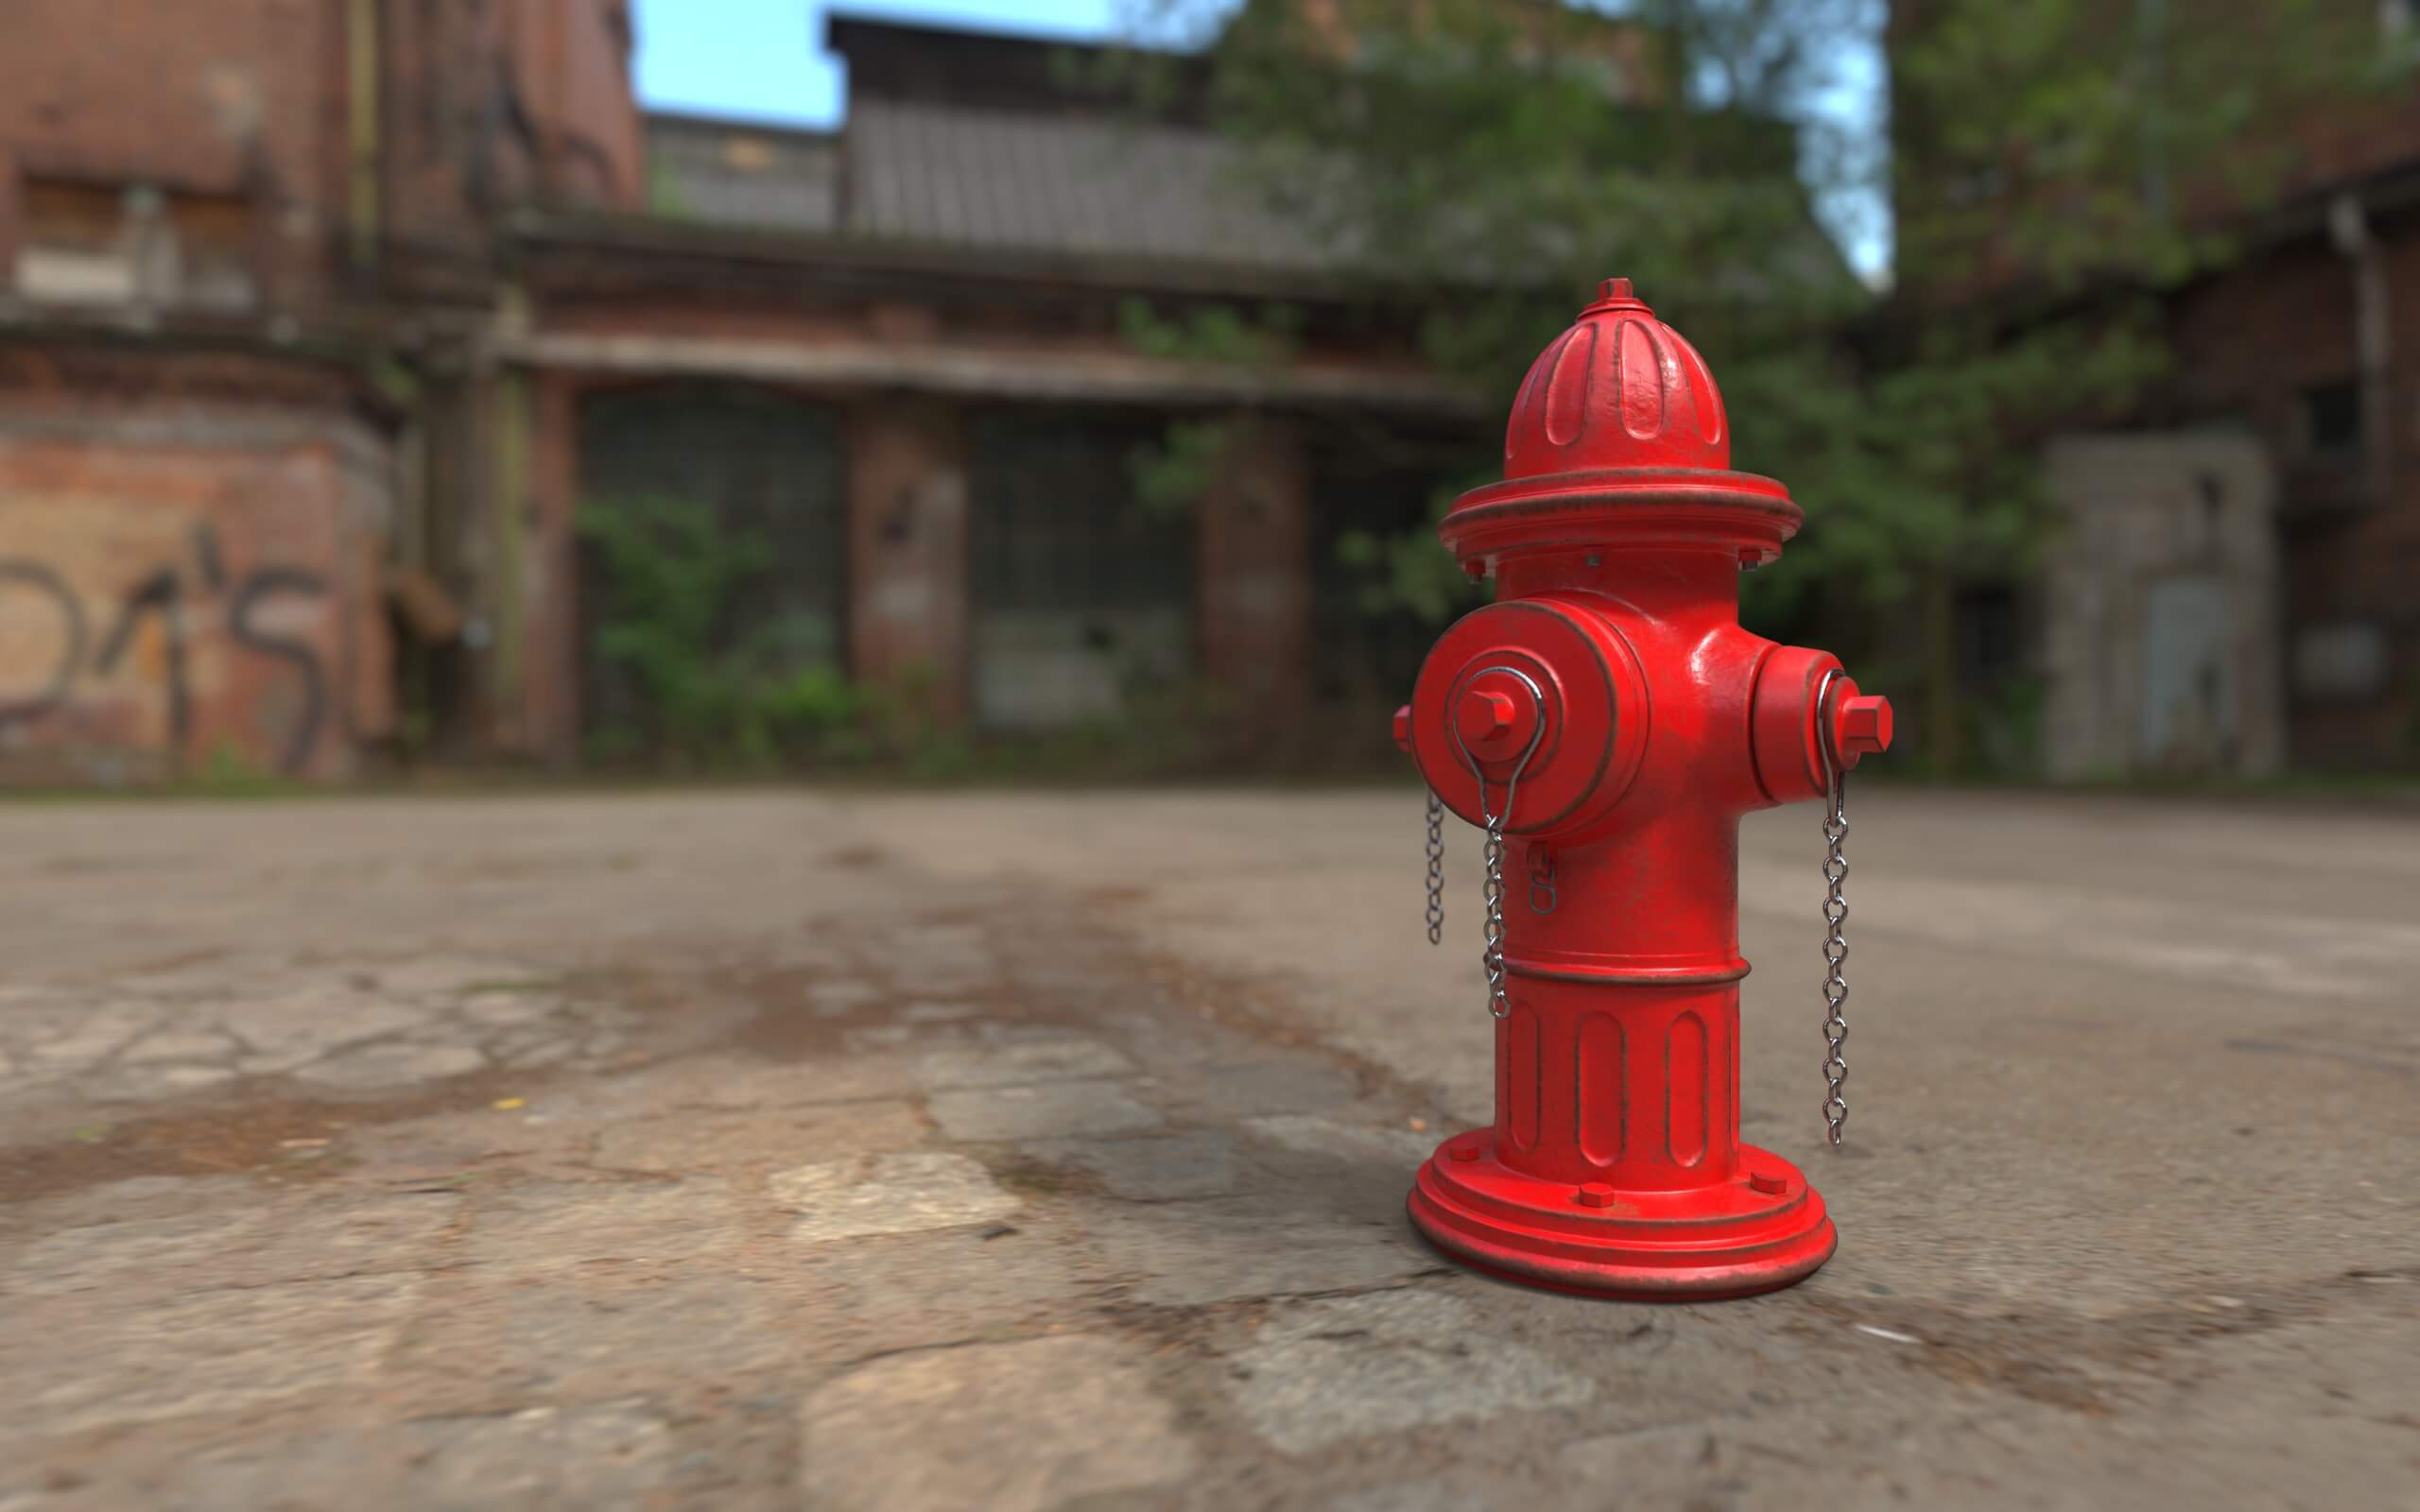 How To Decide The Fire Hydrant System Requirement For Industry